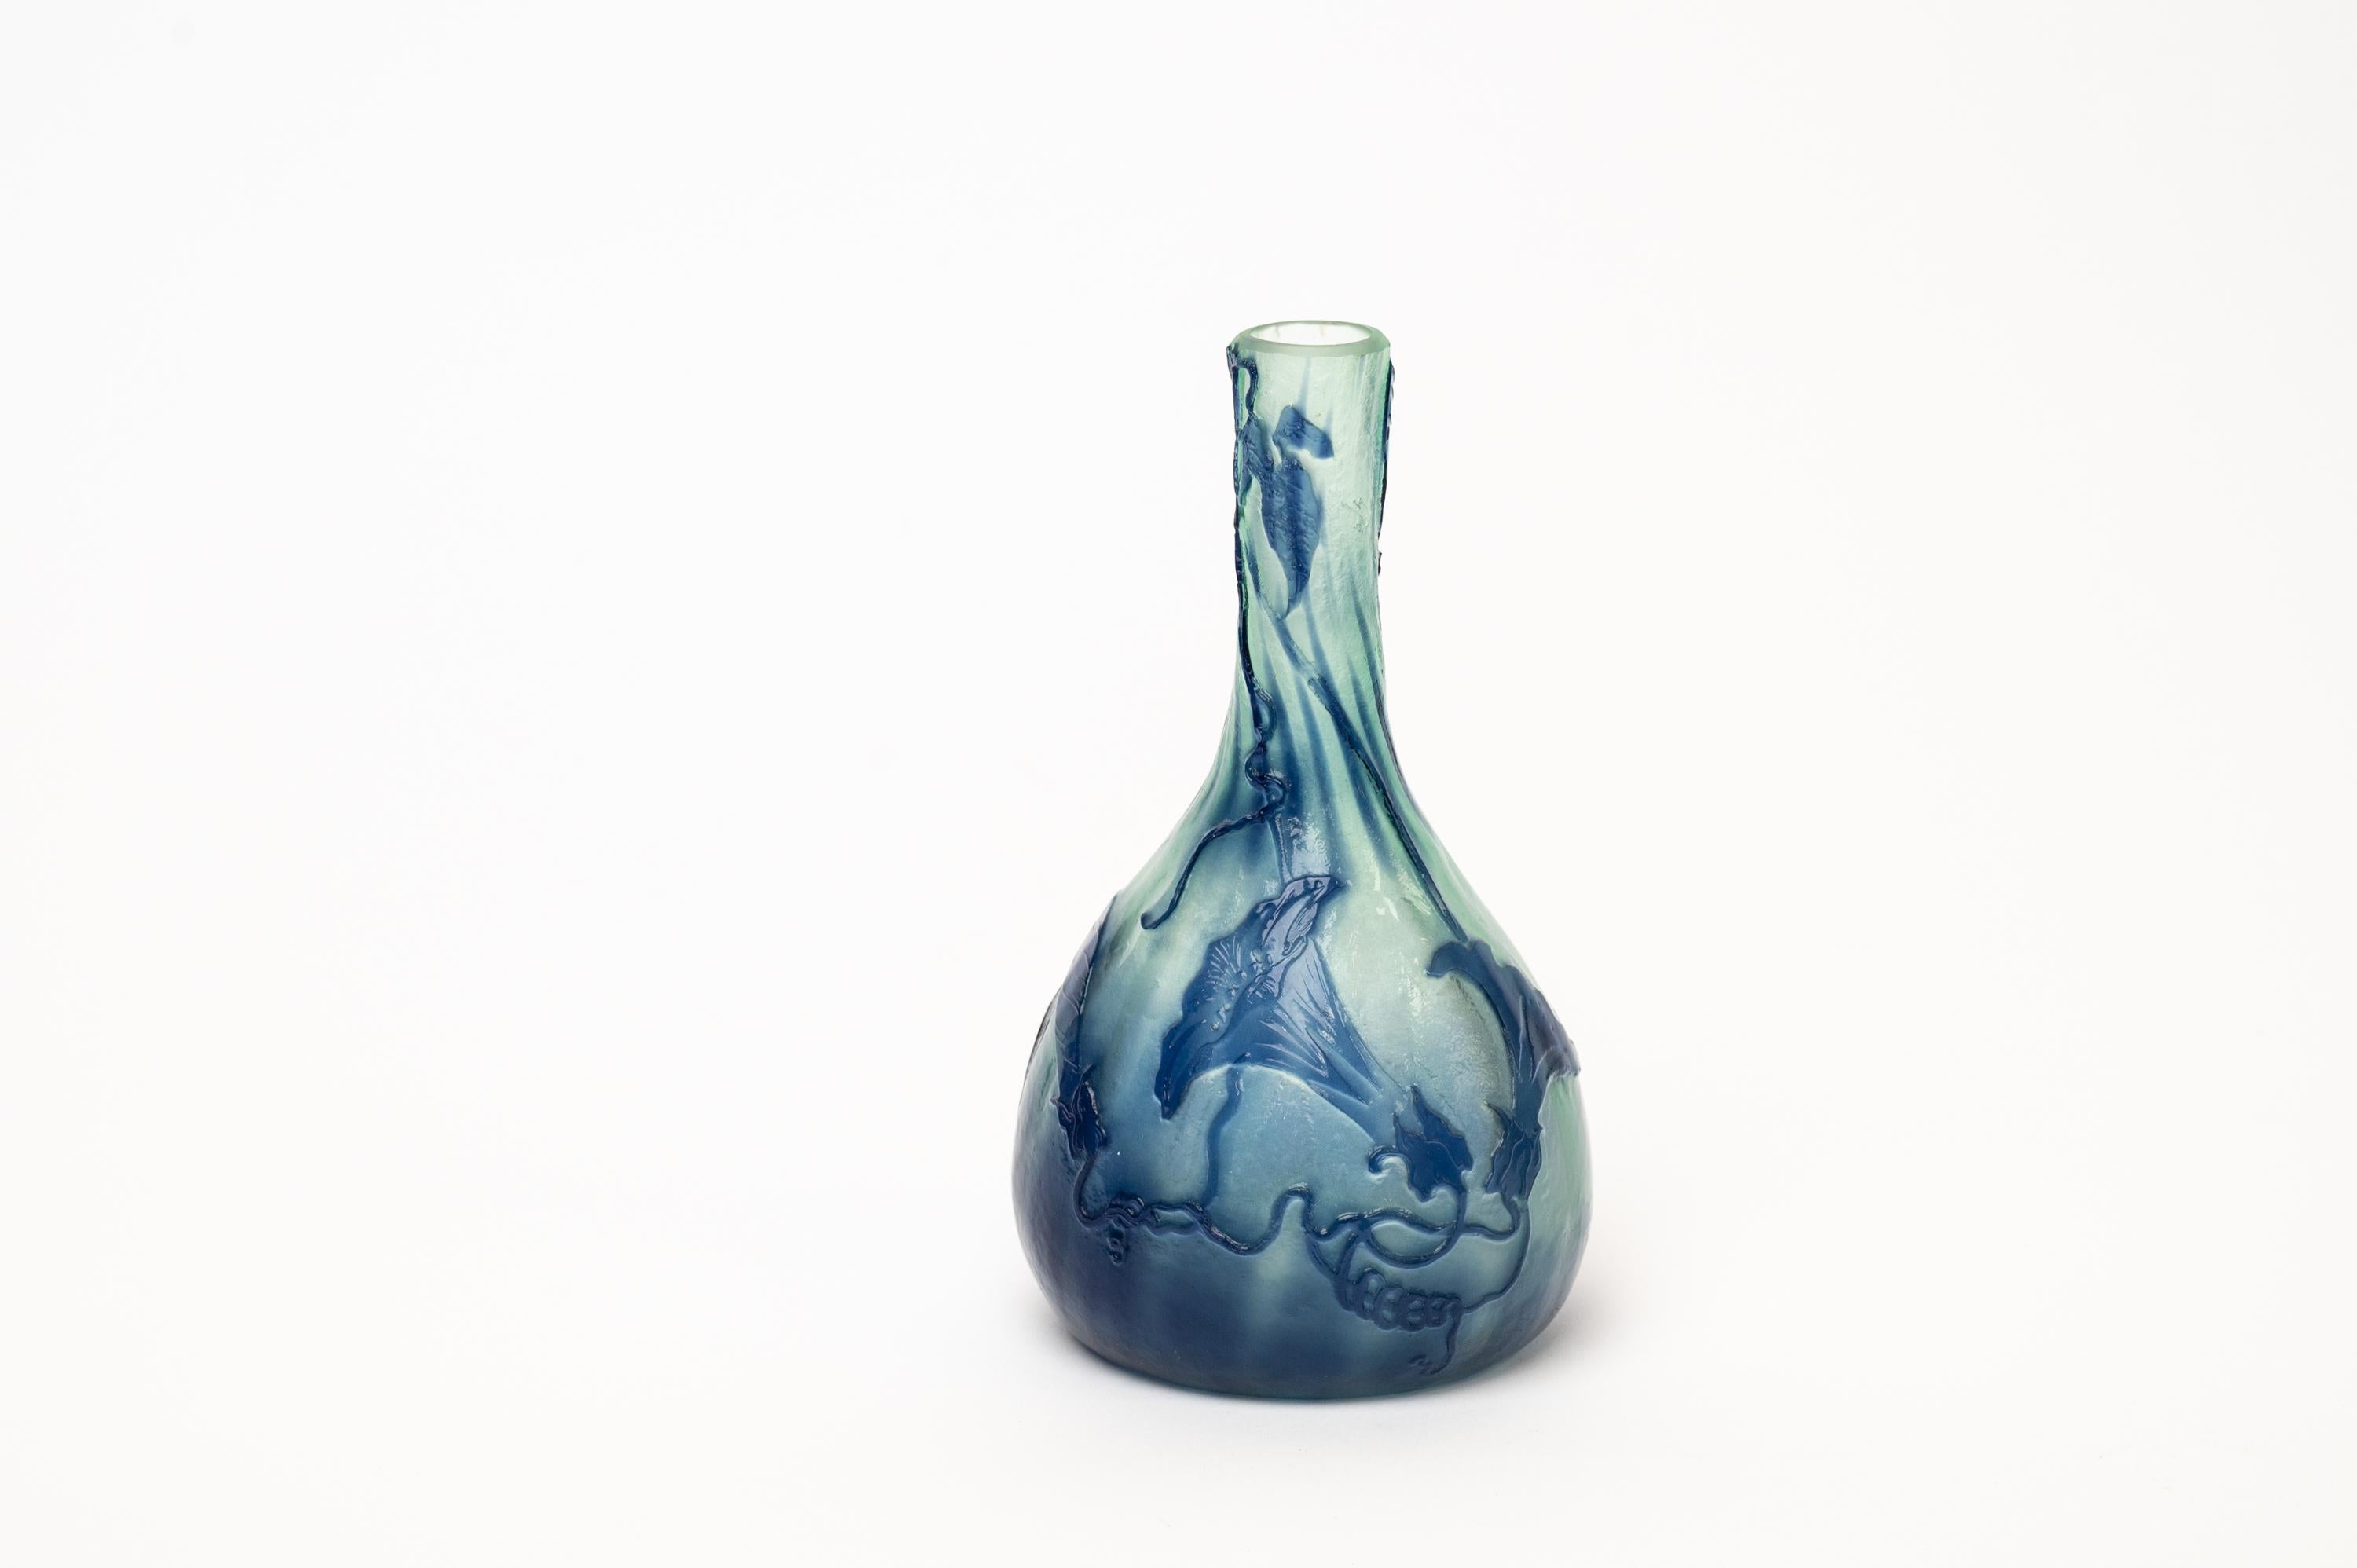 French glass vase by Emile Gallé decorated in various shades of blue and white. It dates from around the 1900s and is in excellent original condition. 

Emile Gallé, a French artist and designer who worked in glass, was born in Nancy, France, in